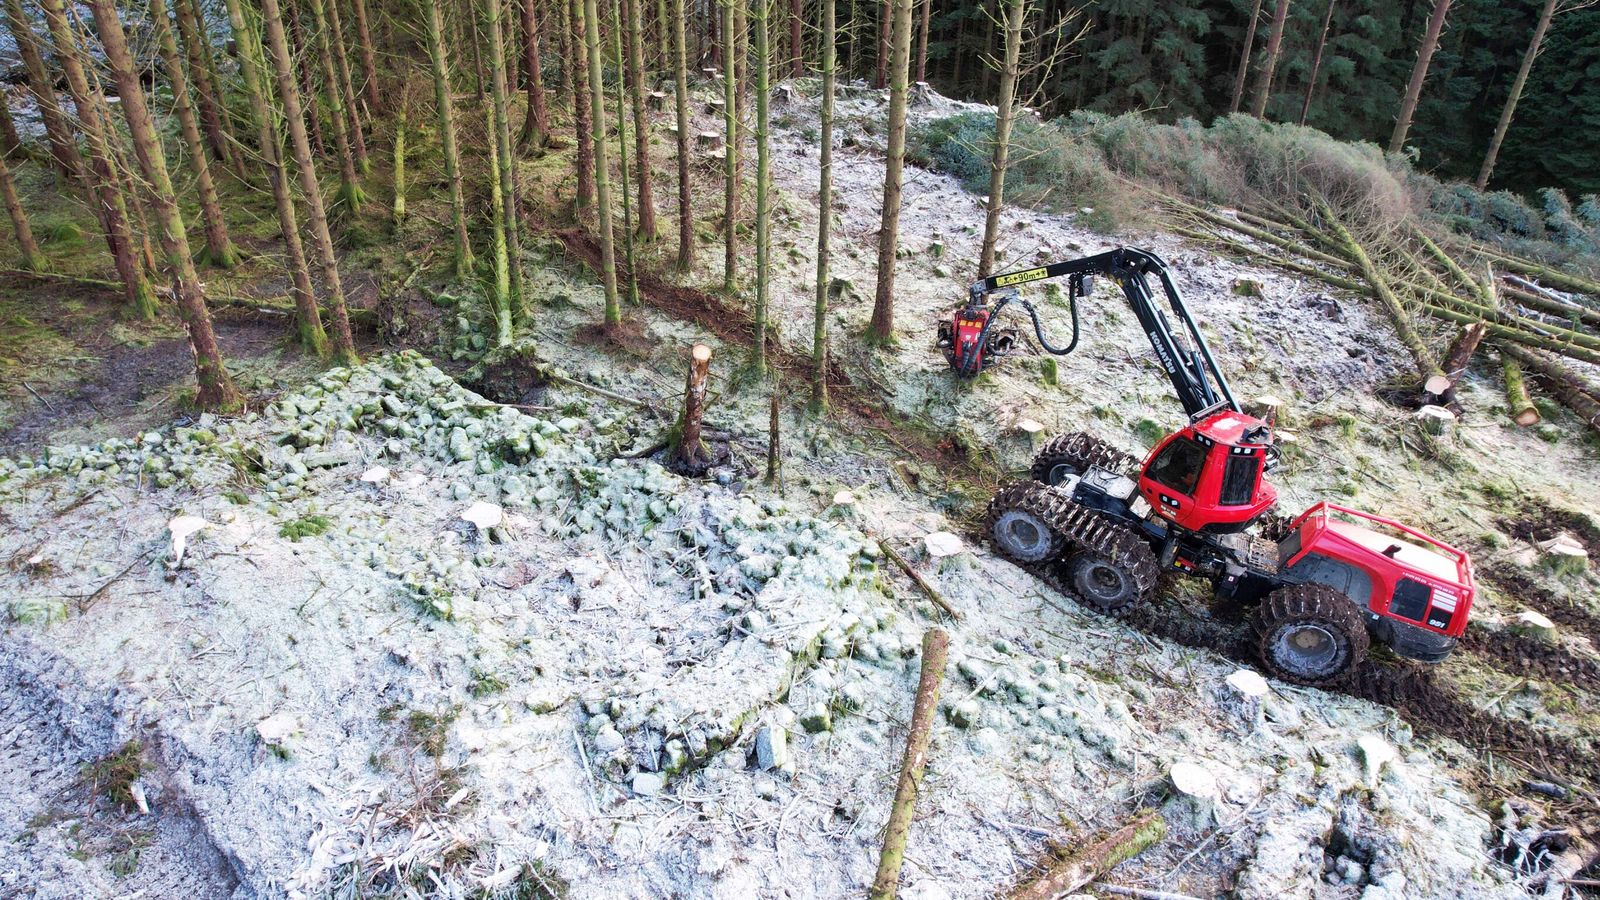 lost village unveiled after tree-felling operation